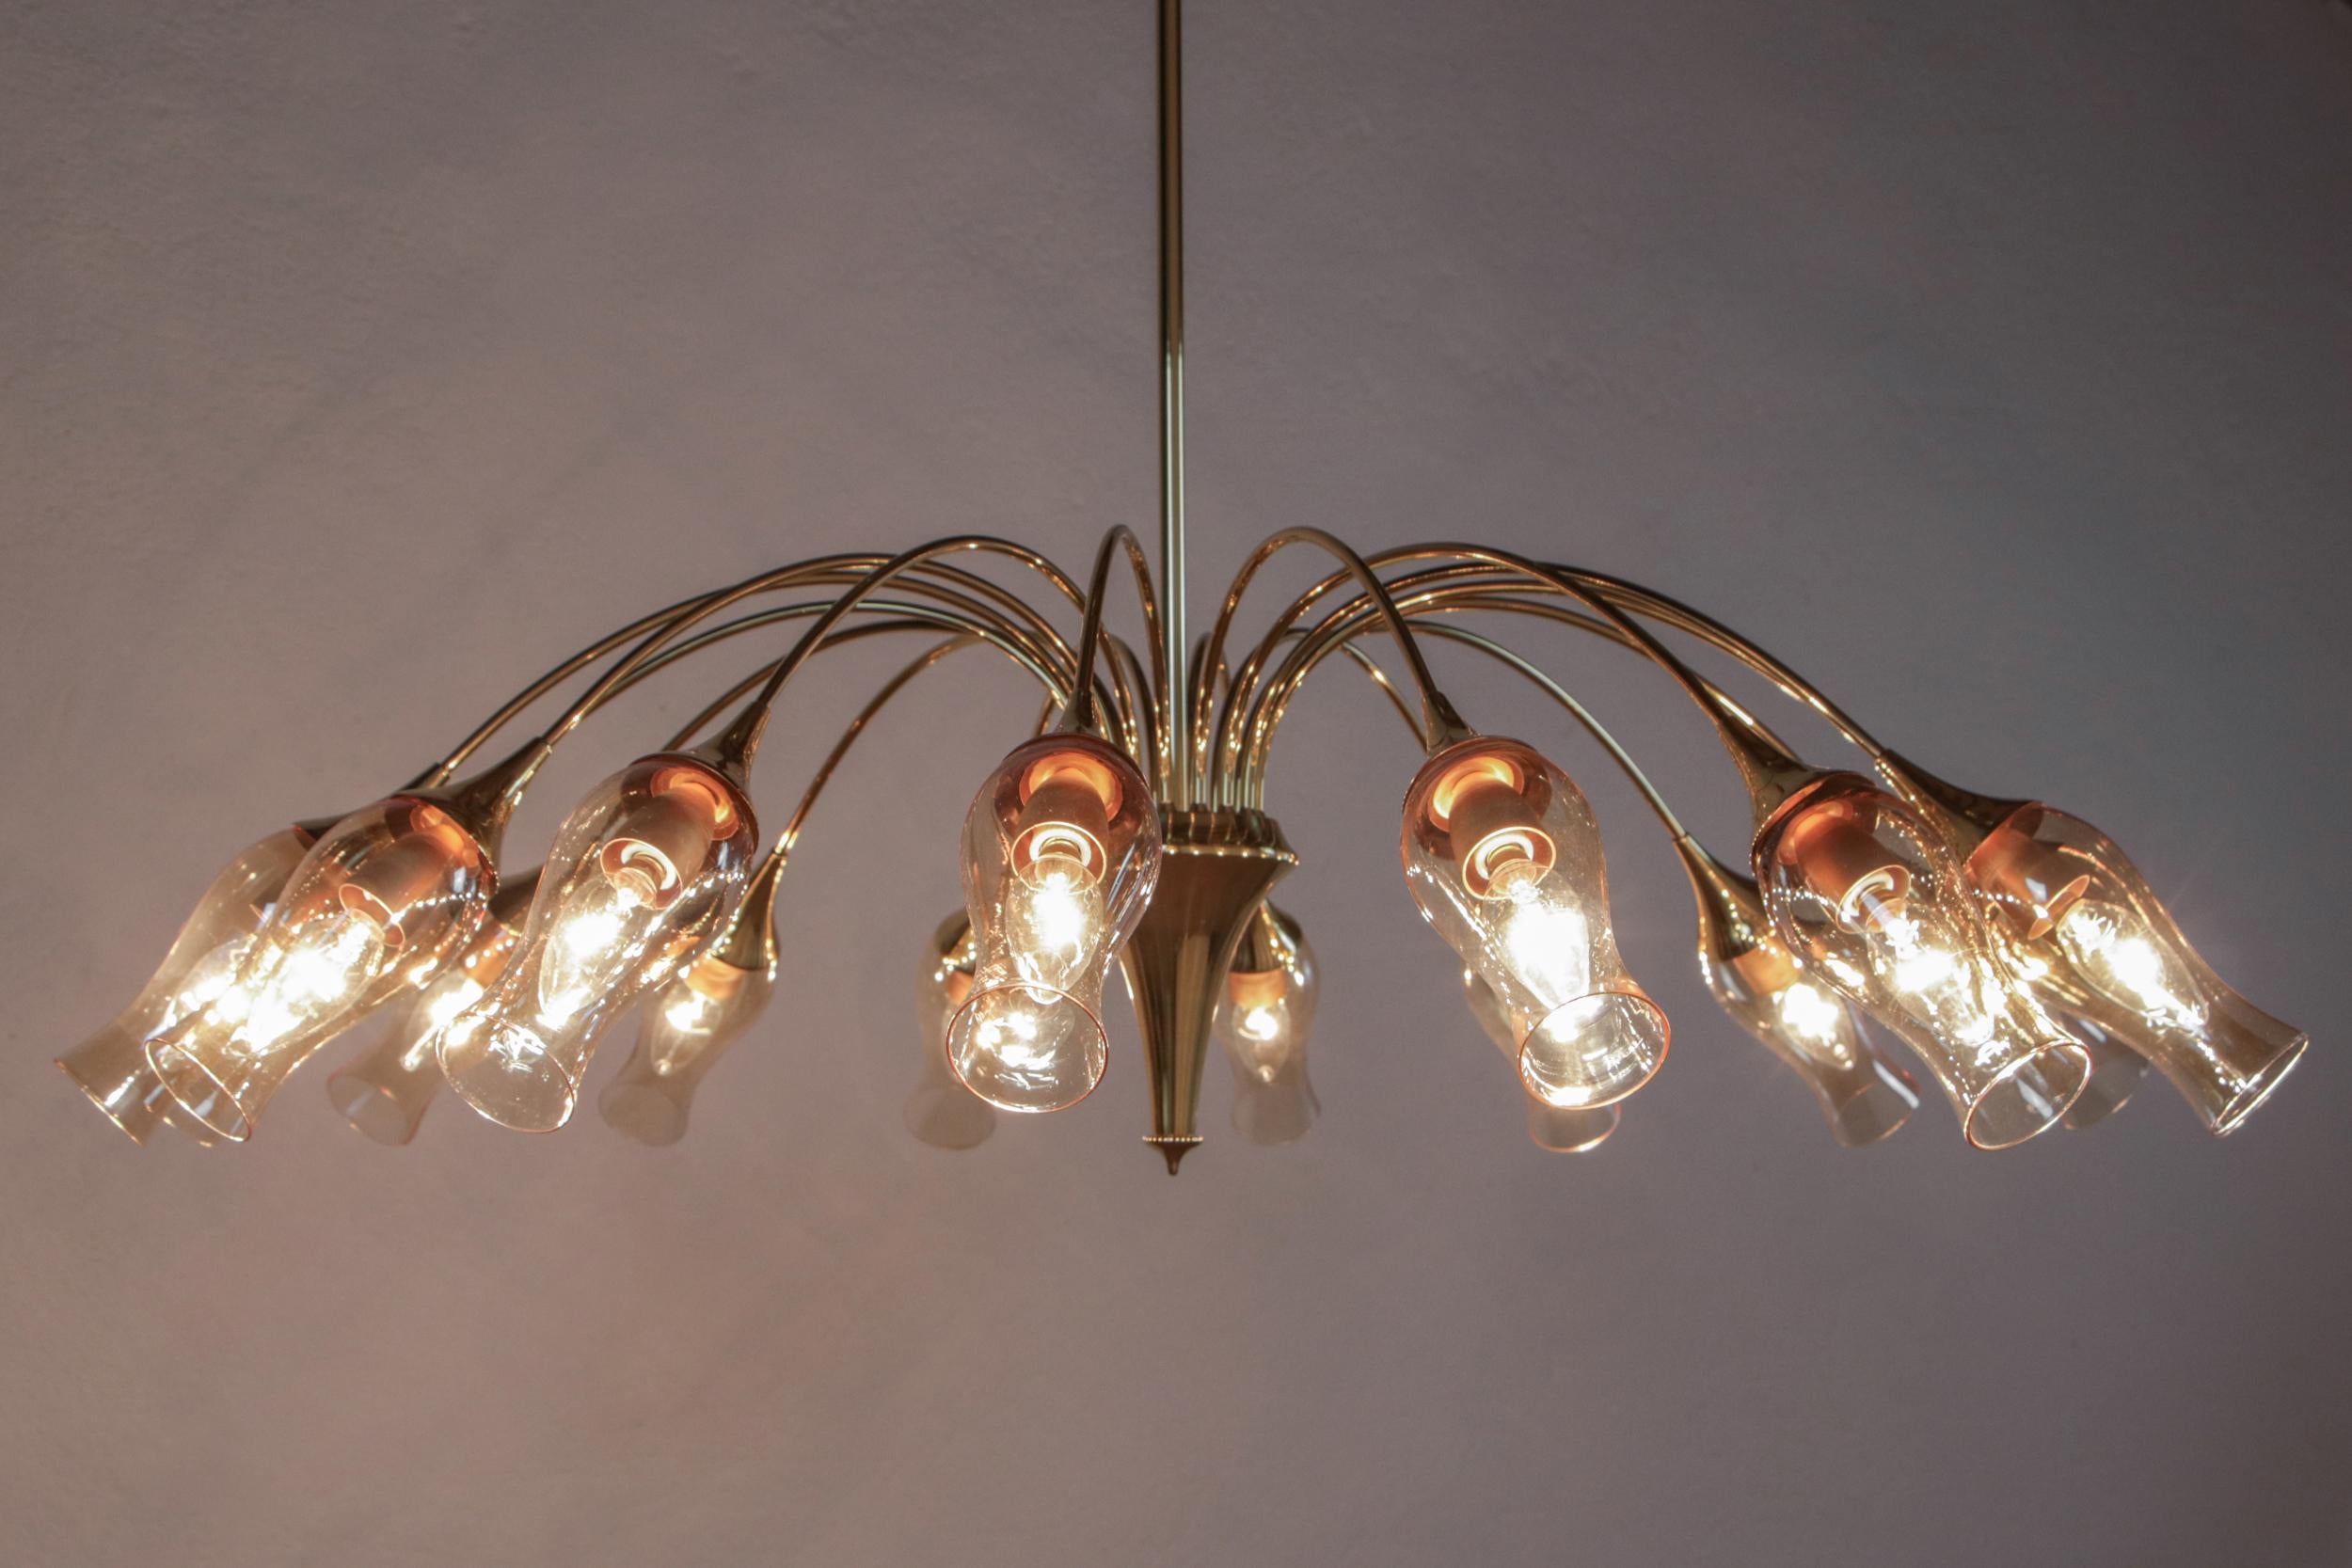 Italian Mid-Century Modern Big Spider Murano Glass Chandelier, Gold Color, 1950s For Sale 9